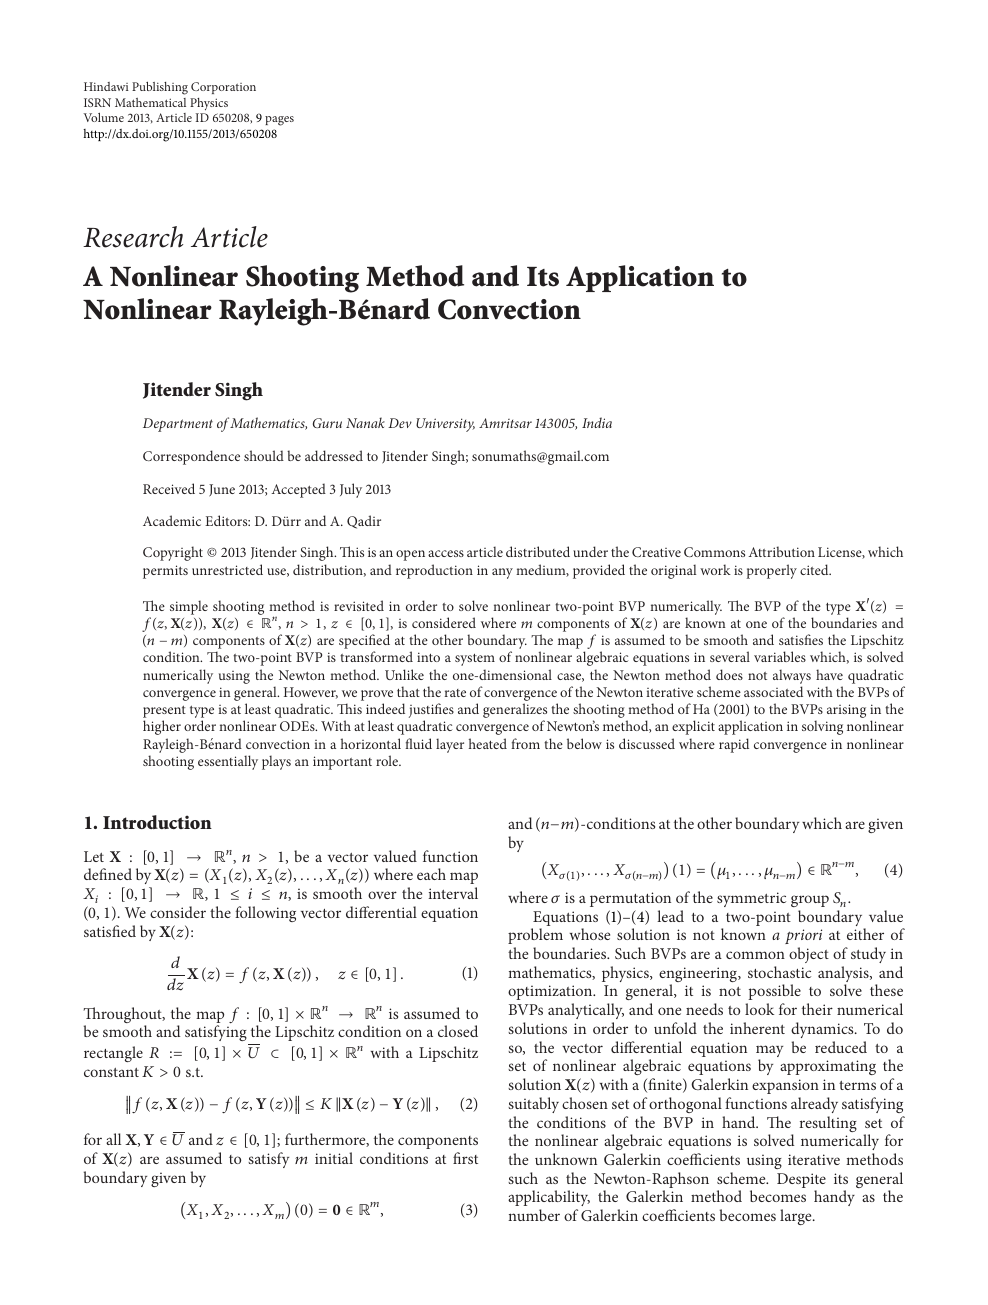 A Nonlinear Shooting Method And Its Application To Nonlinear Rayleigh Benard Convection Topic Of Research Paper In Mathematics Download Scholarly Article Pdf And Read For Free On Cyberleninka Open Science Hub